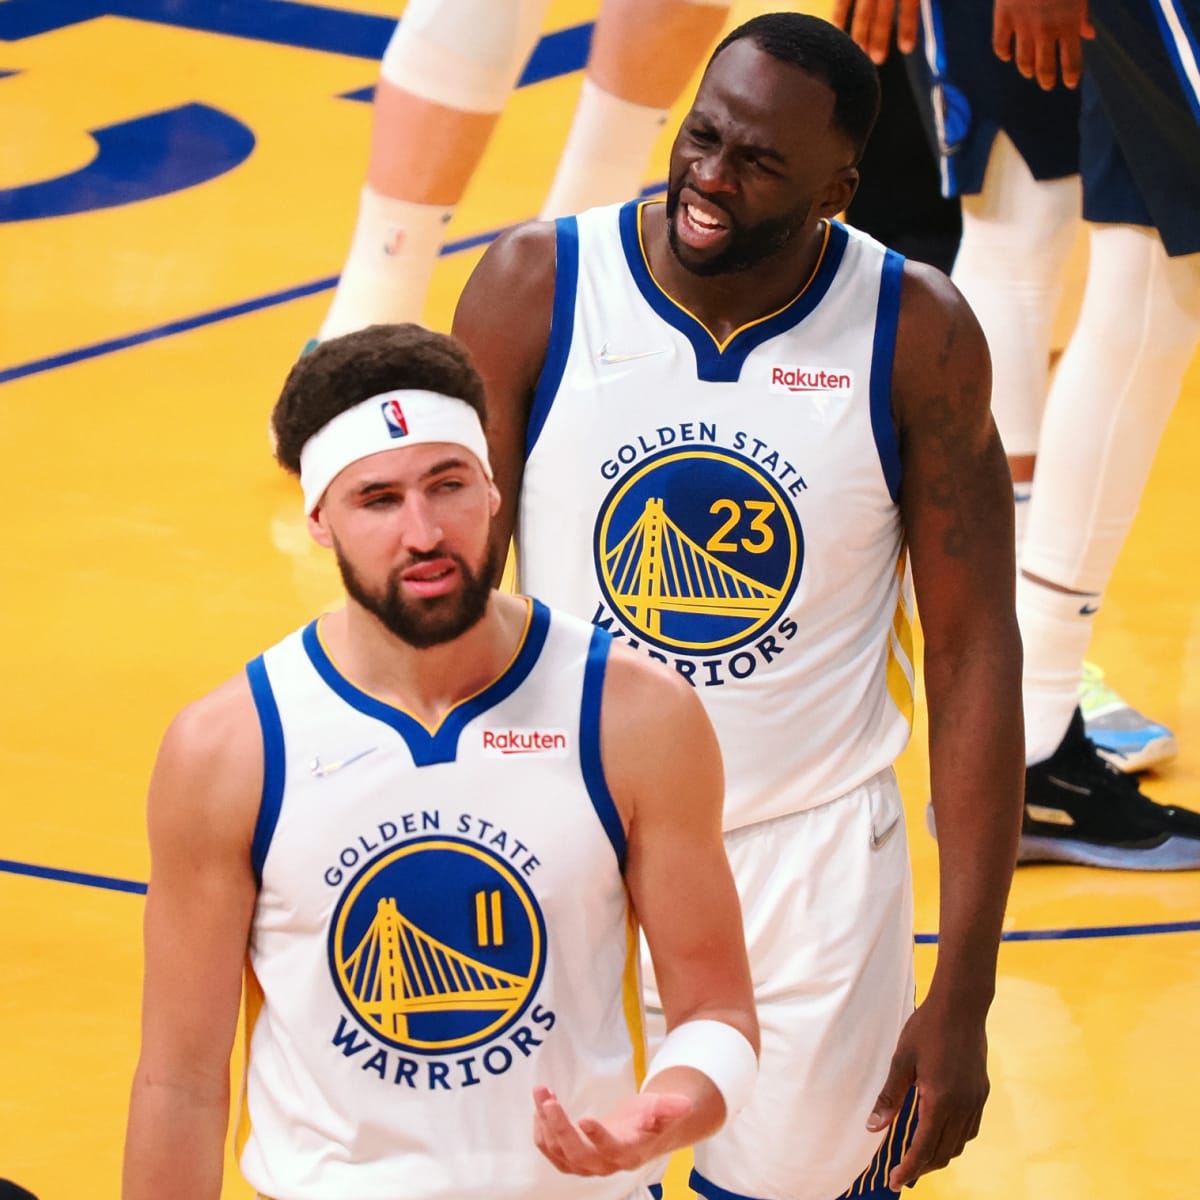 Draymond Green was a shell of himself… Klay Thompson wasn't nearly